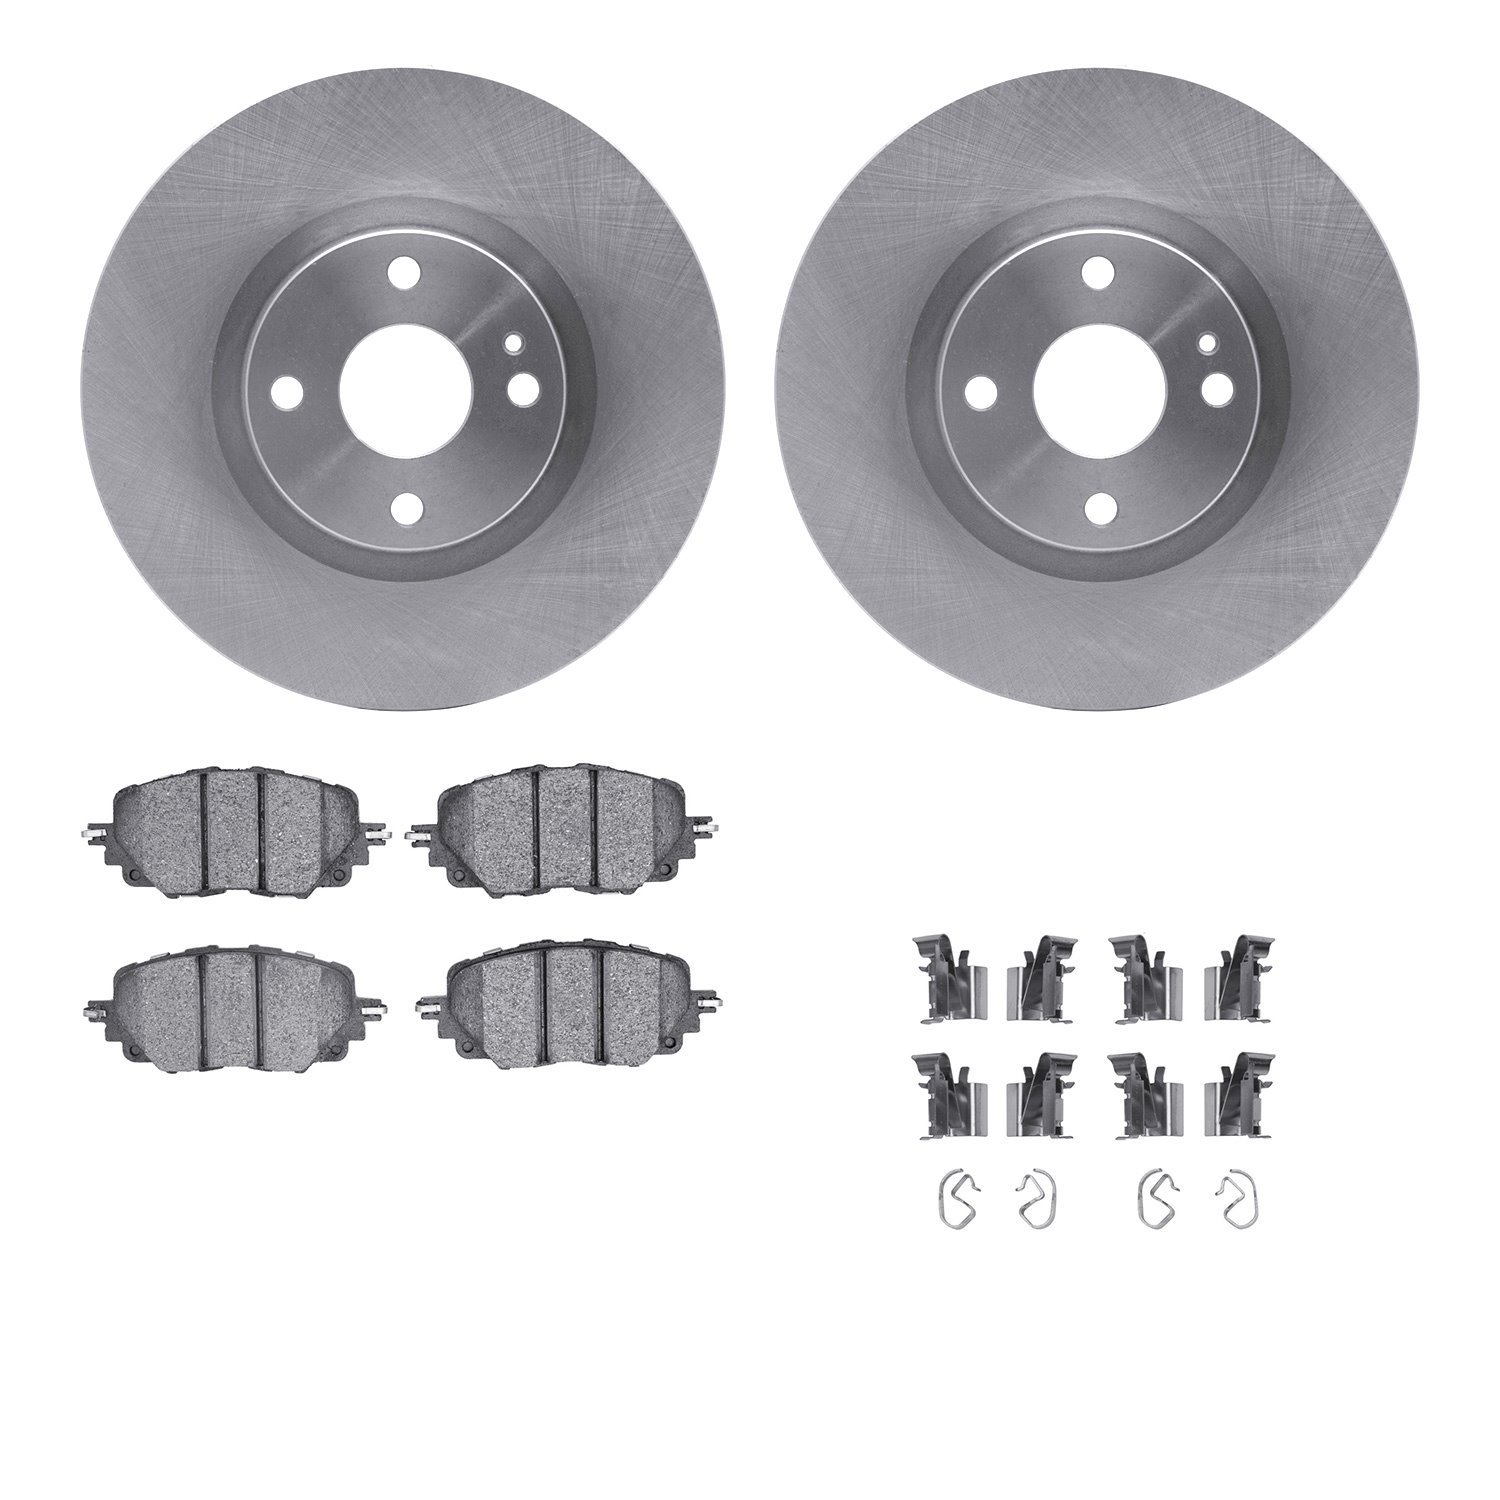 6612-80035 Brake Rotors w/5000 Euro Ceramic Brake Pads Kit with Hardware, Fits Select Multiple Makes/Models, Position: Front